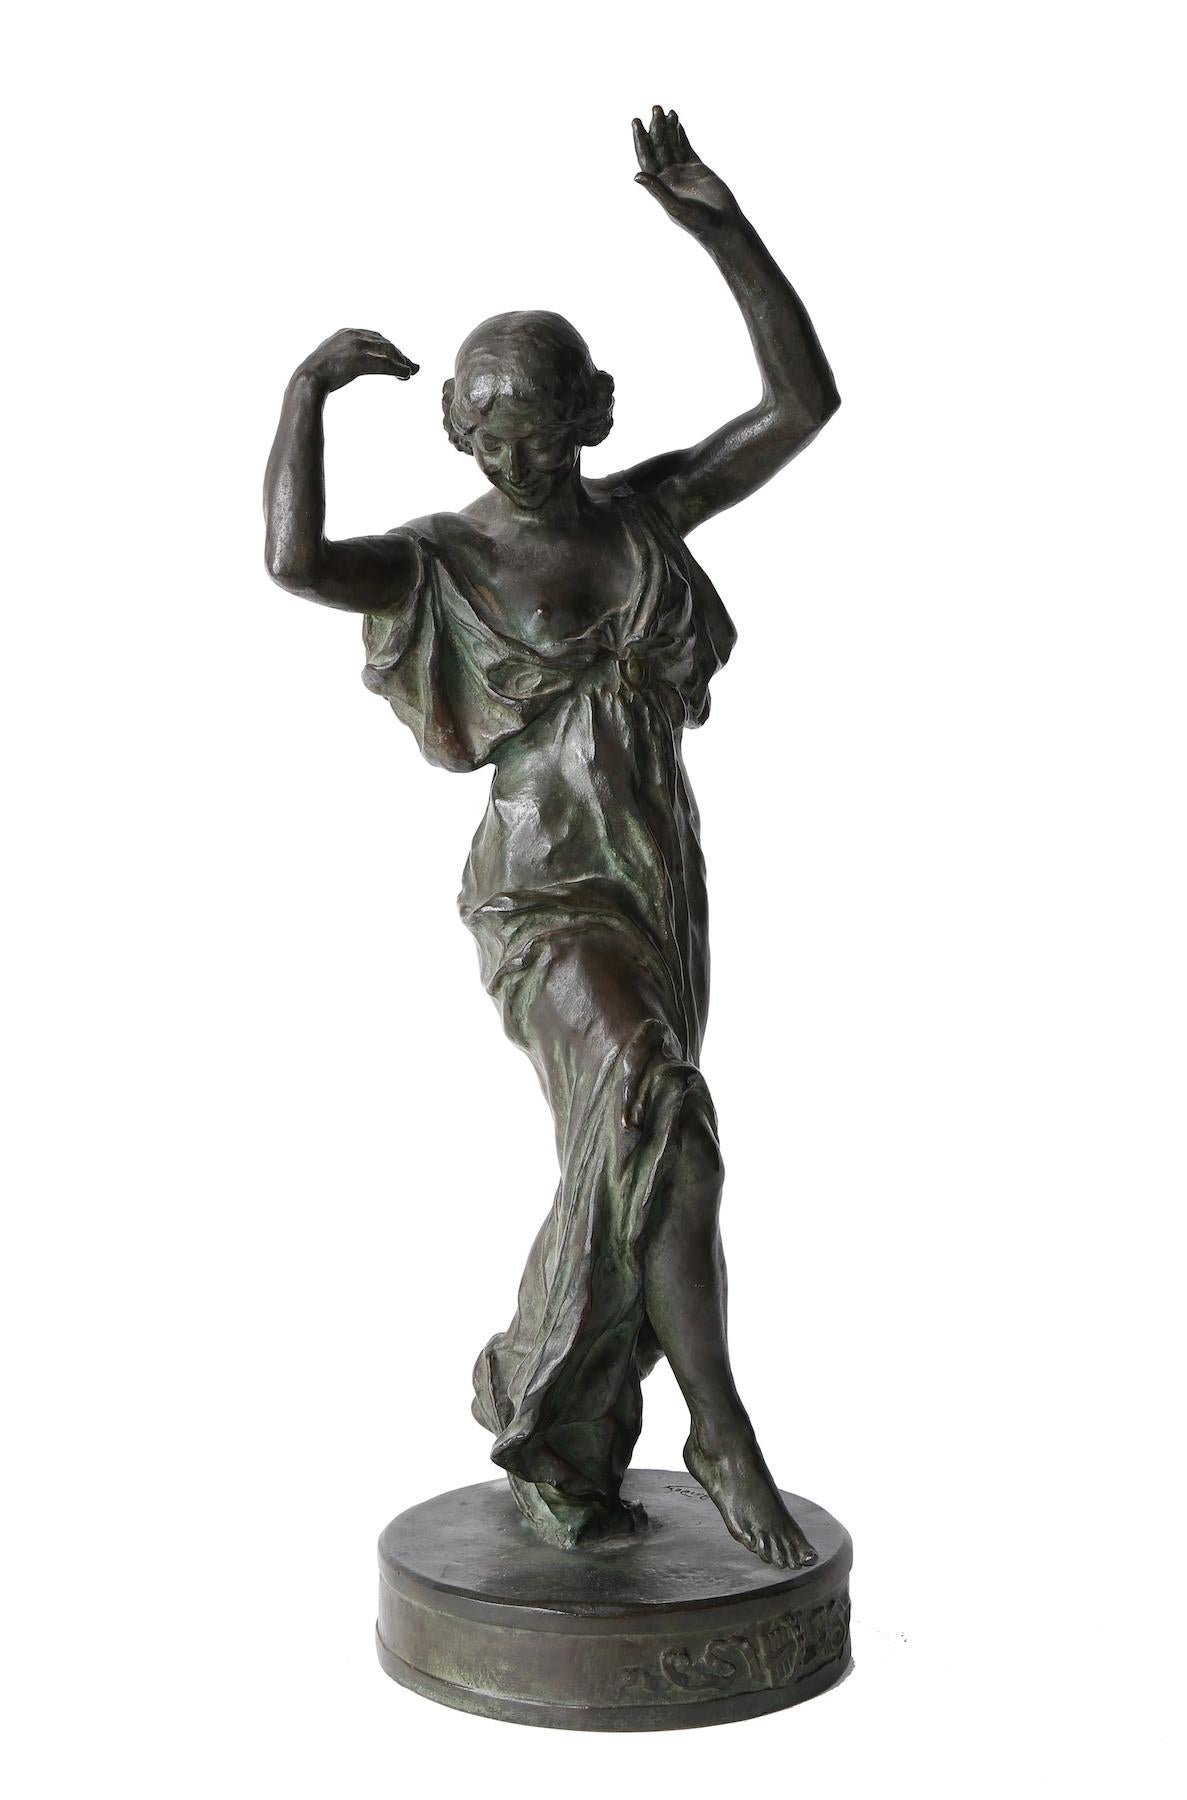 Louis Armand Bardery Nude Sculpture - Muse of Dance, Early 20th century French bronze sculpture of woman